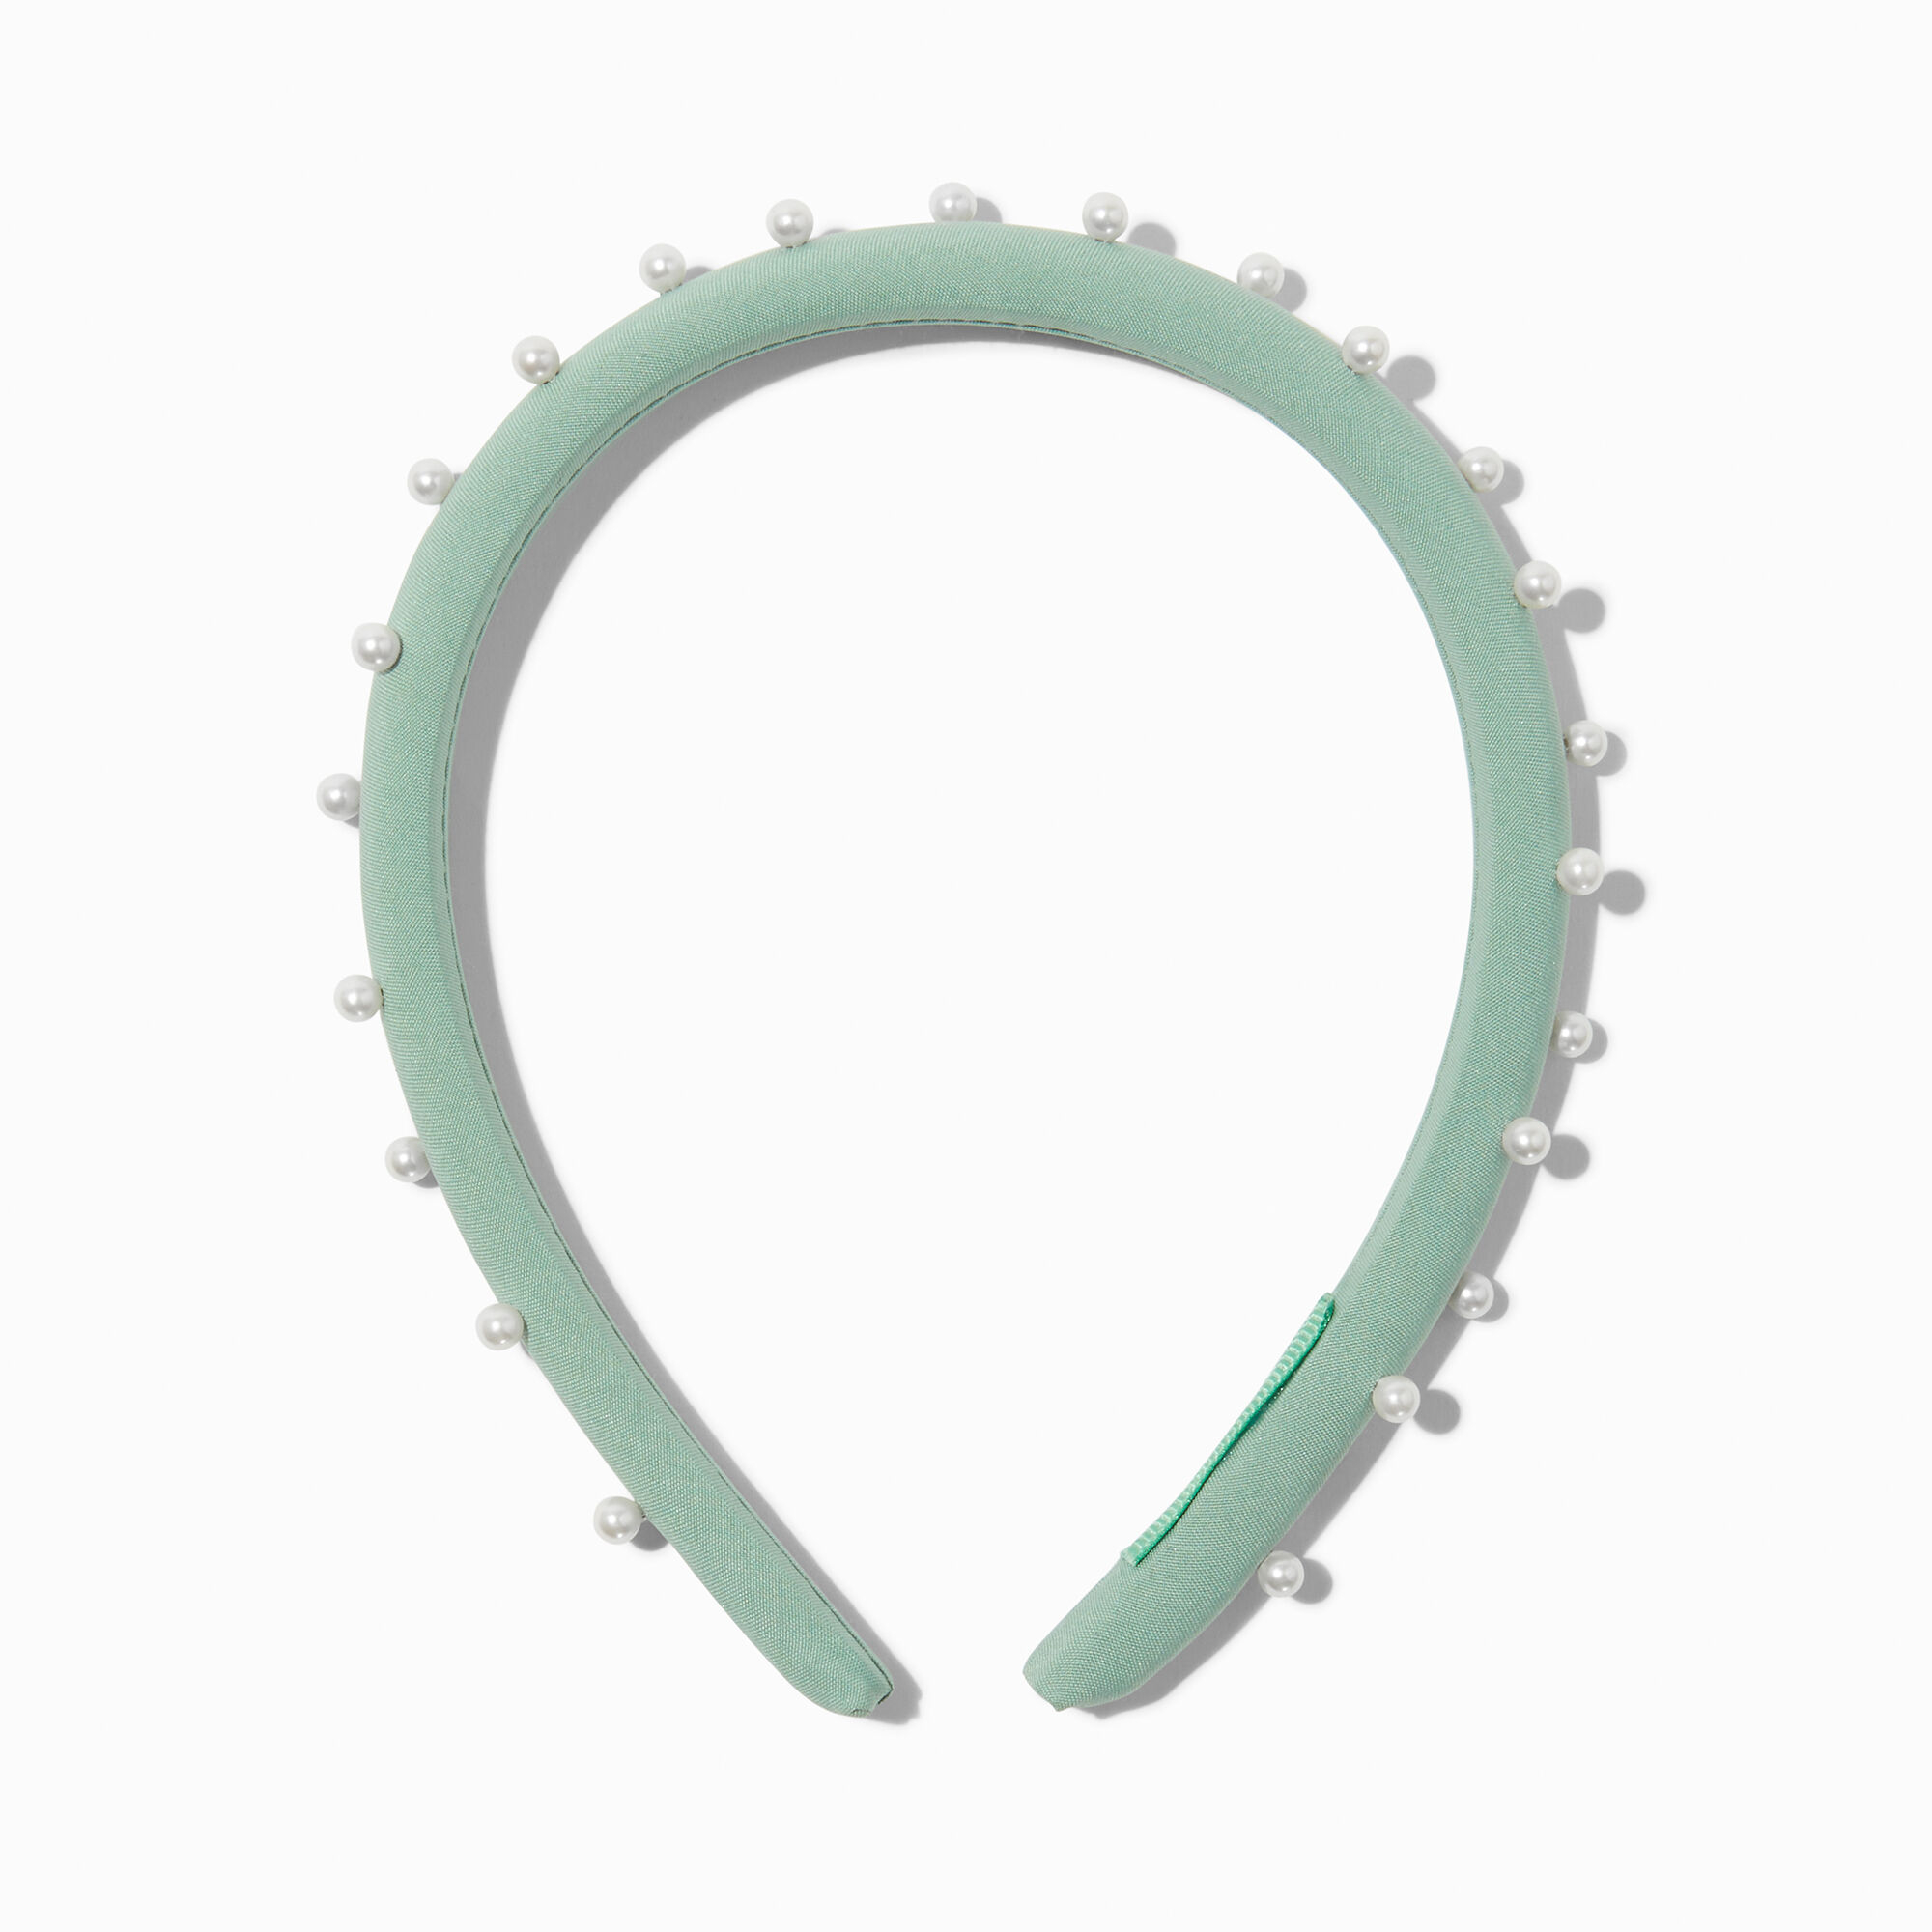 View Claires Pearl Embellished Headband Green information